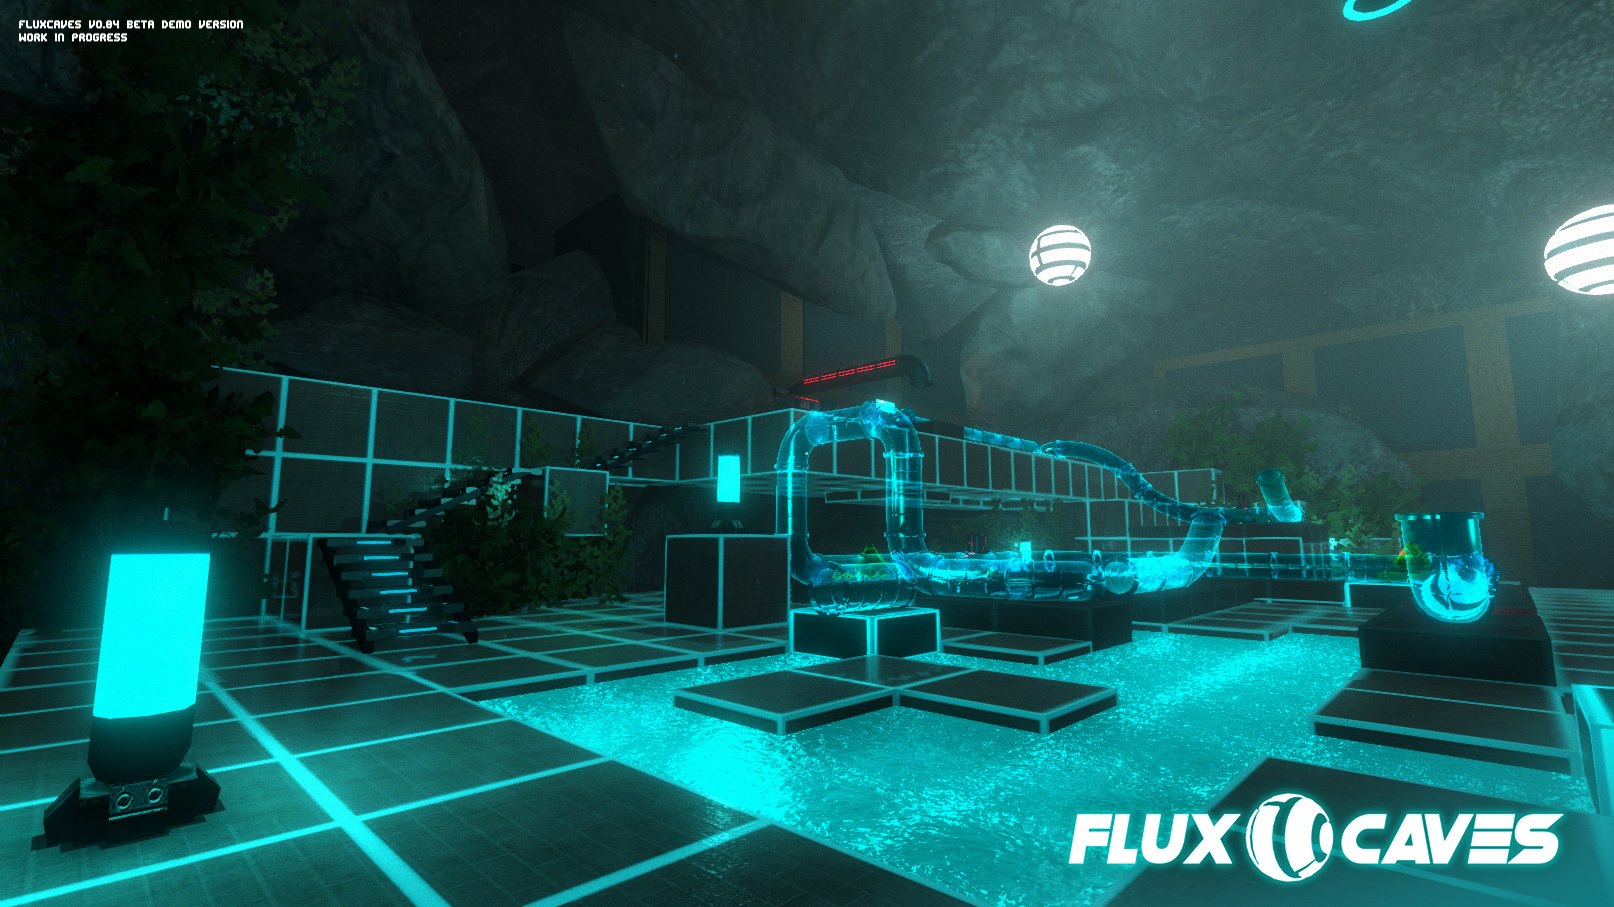 Linux Gaming - Flux Caves on Linux